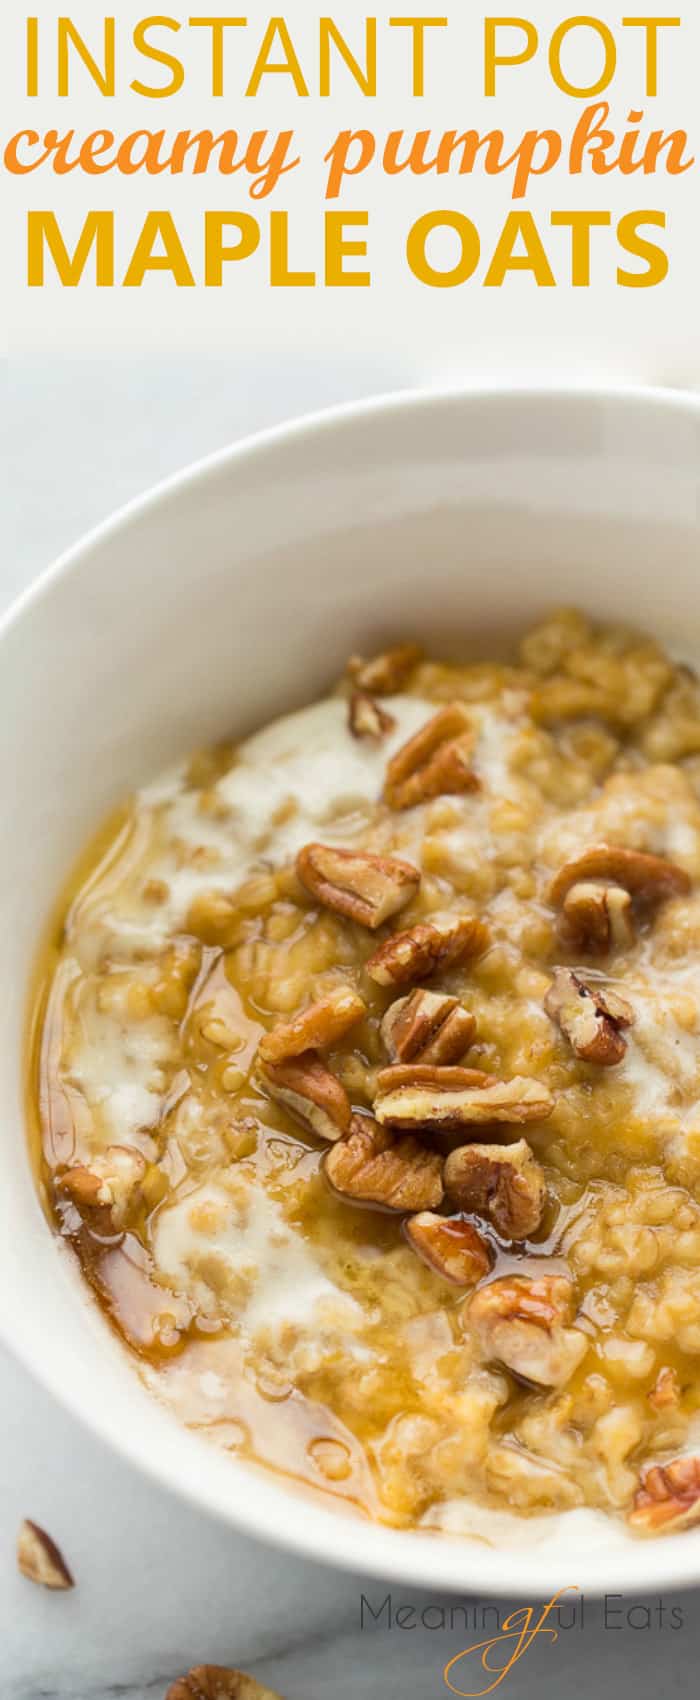 Instant Pot Creamy Pumpkin Maple Oatmeal! No-stir, perfectly soft oats cooked for 10 minutes in the pressure cooker. Lightly sweet with all the flavors of fall! {Dairy-Free, Gluten-Free}